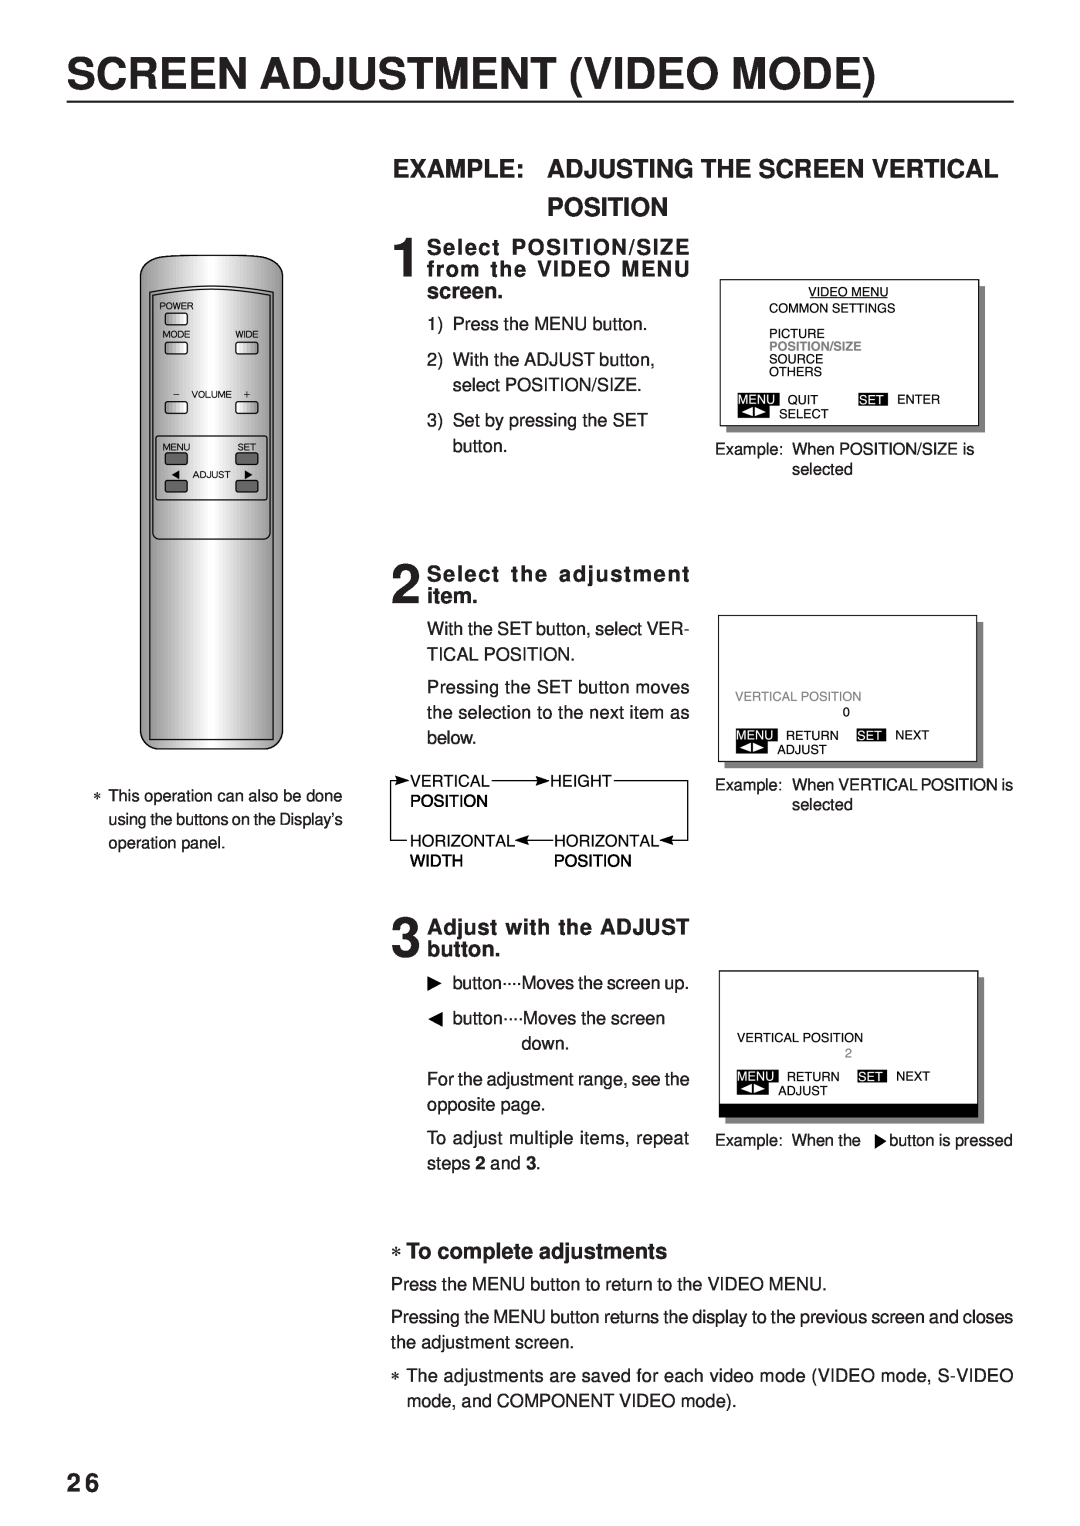 Fujitsu PDS4203W-H / PDS4203E-H user manual Screen Adjustment Video Mode, Example Adjusting The Screen Vertical Position 